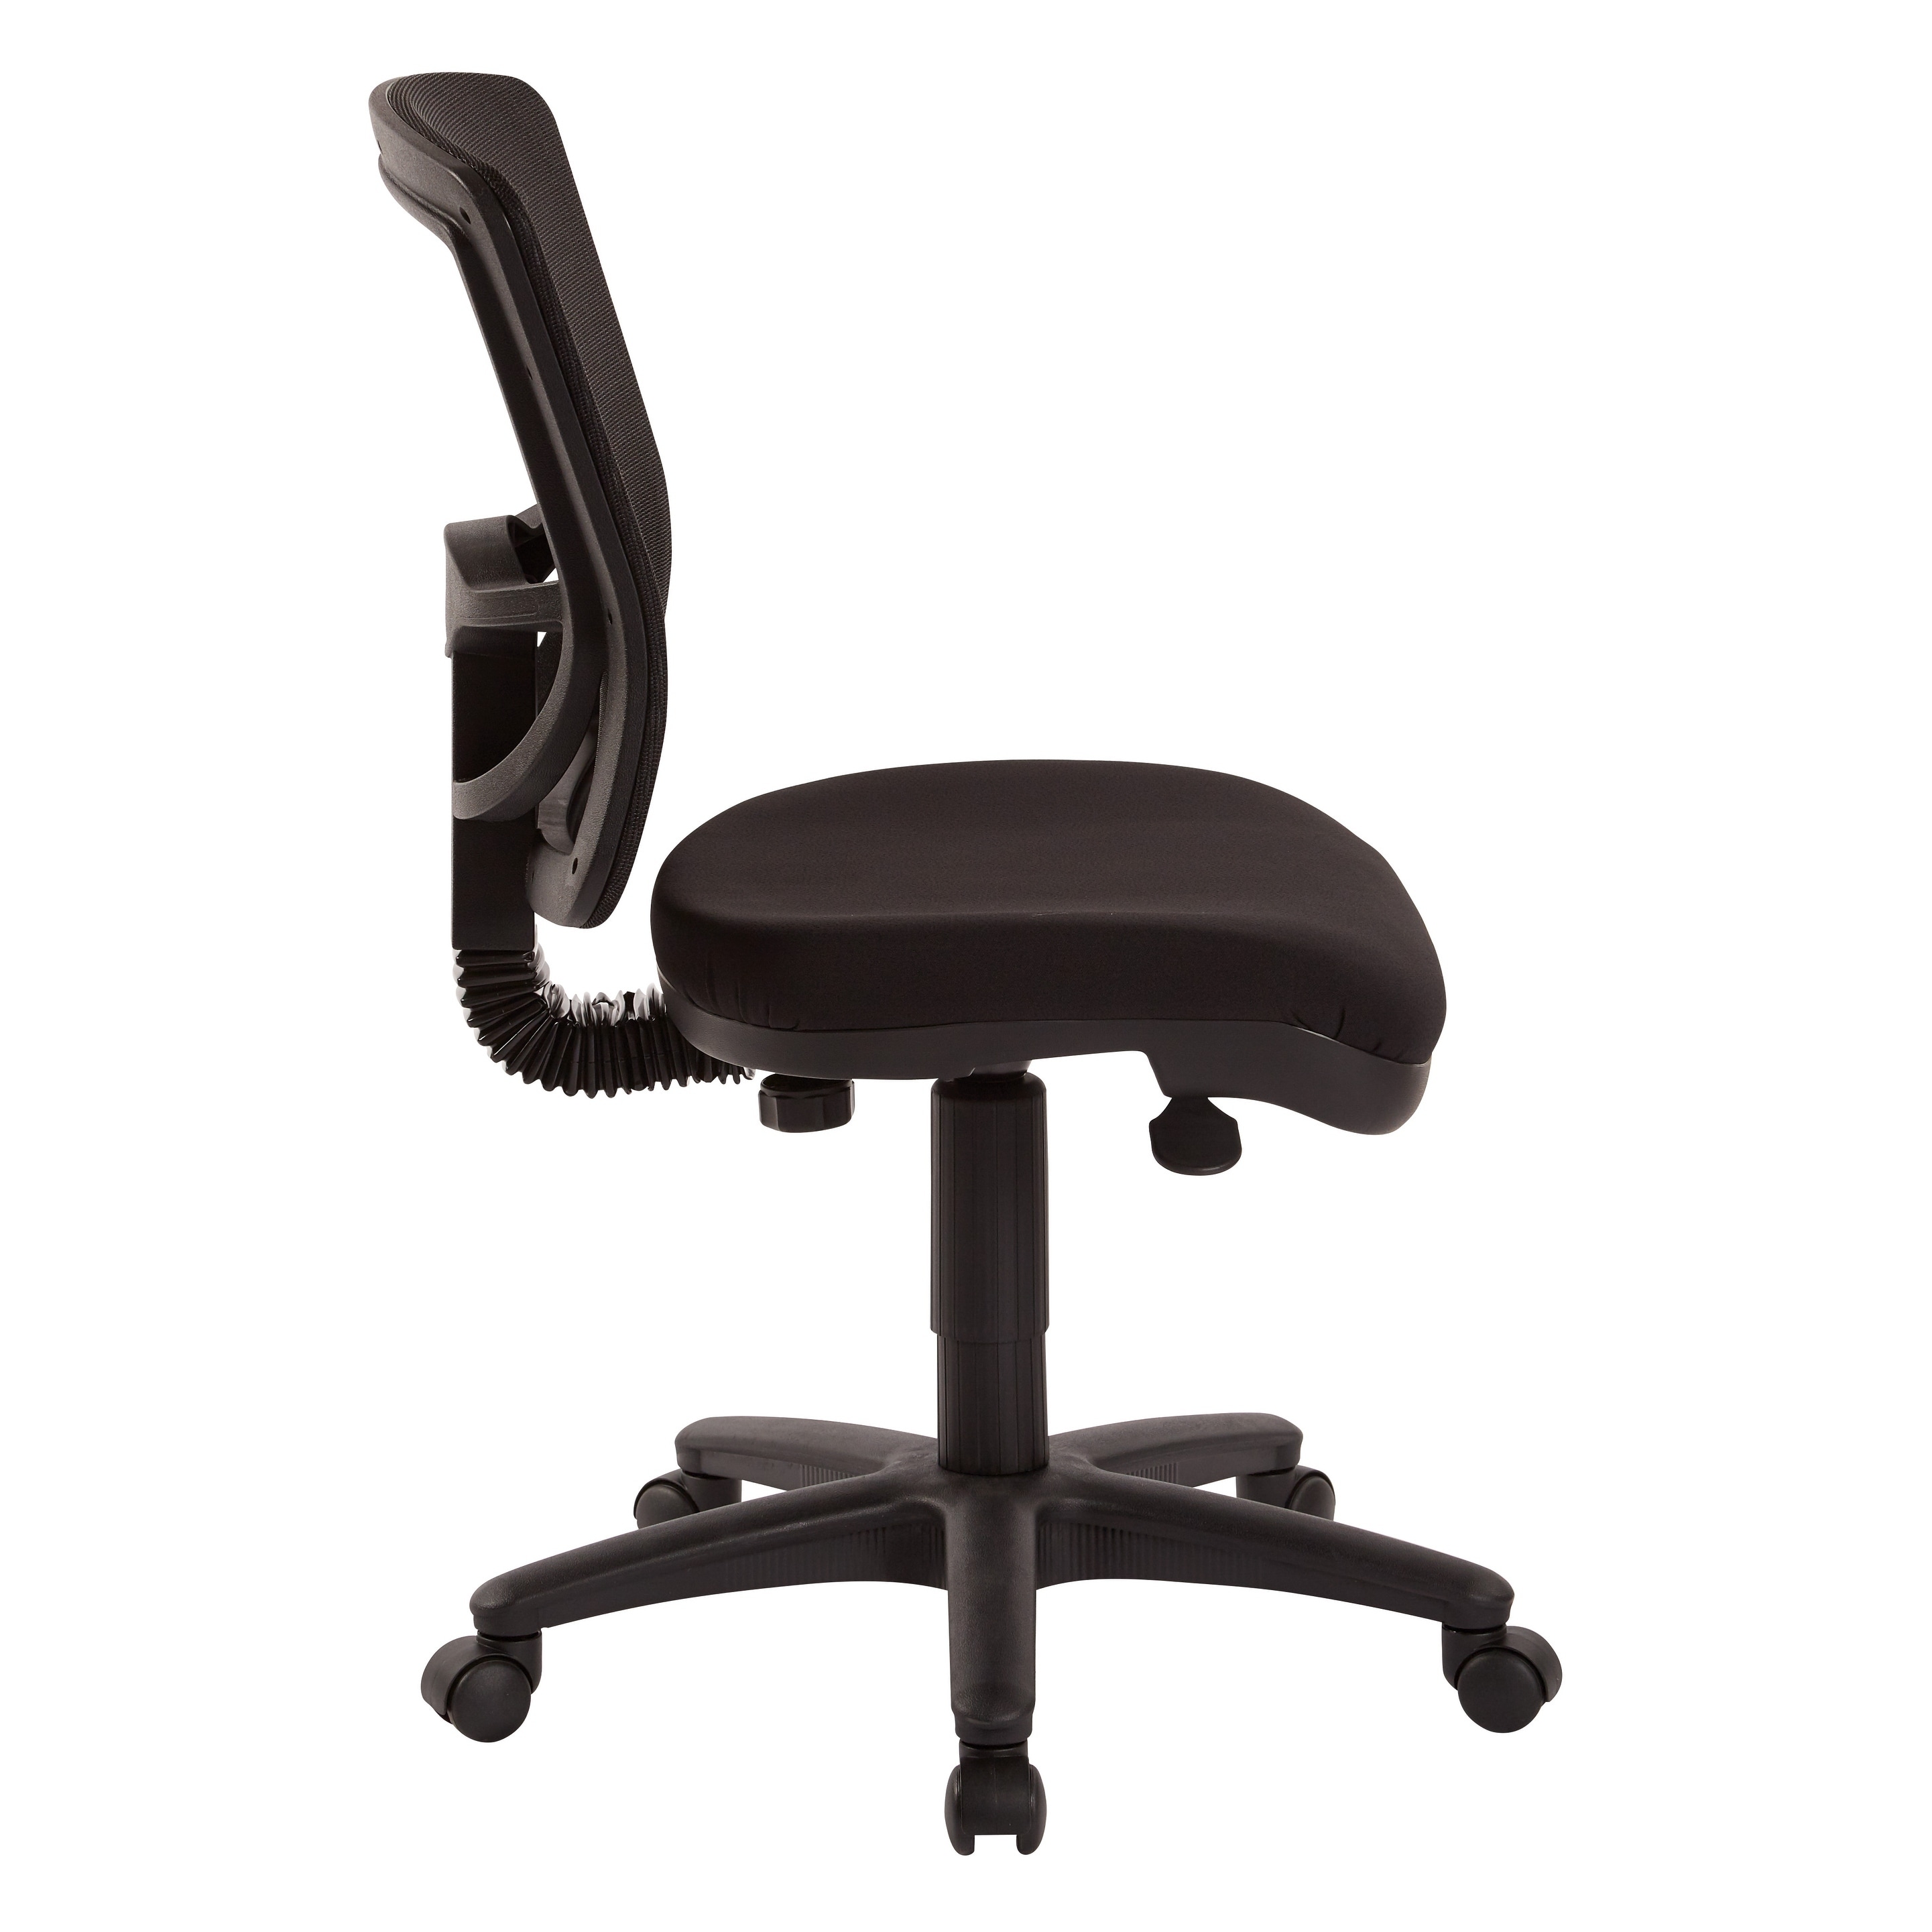 https://ak1.ostkcdn.com/images/products/23015887/Pro-Line-II-ProGrid-Mesh-Back-Armless-Task-Chair-with-Paded-Coal-FreeFlex-Fabric-Seat-Ratchet-Back-and-Pneumatic-Control-920f3dda-4358-4c40-9eac-d4957e7c213a.jpg